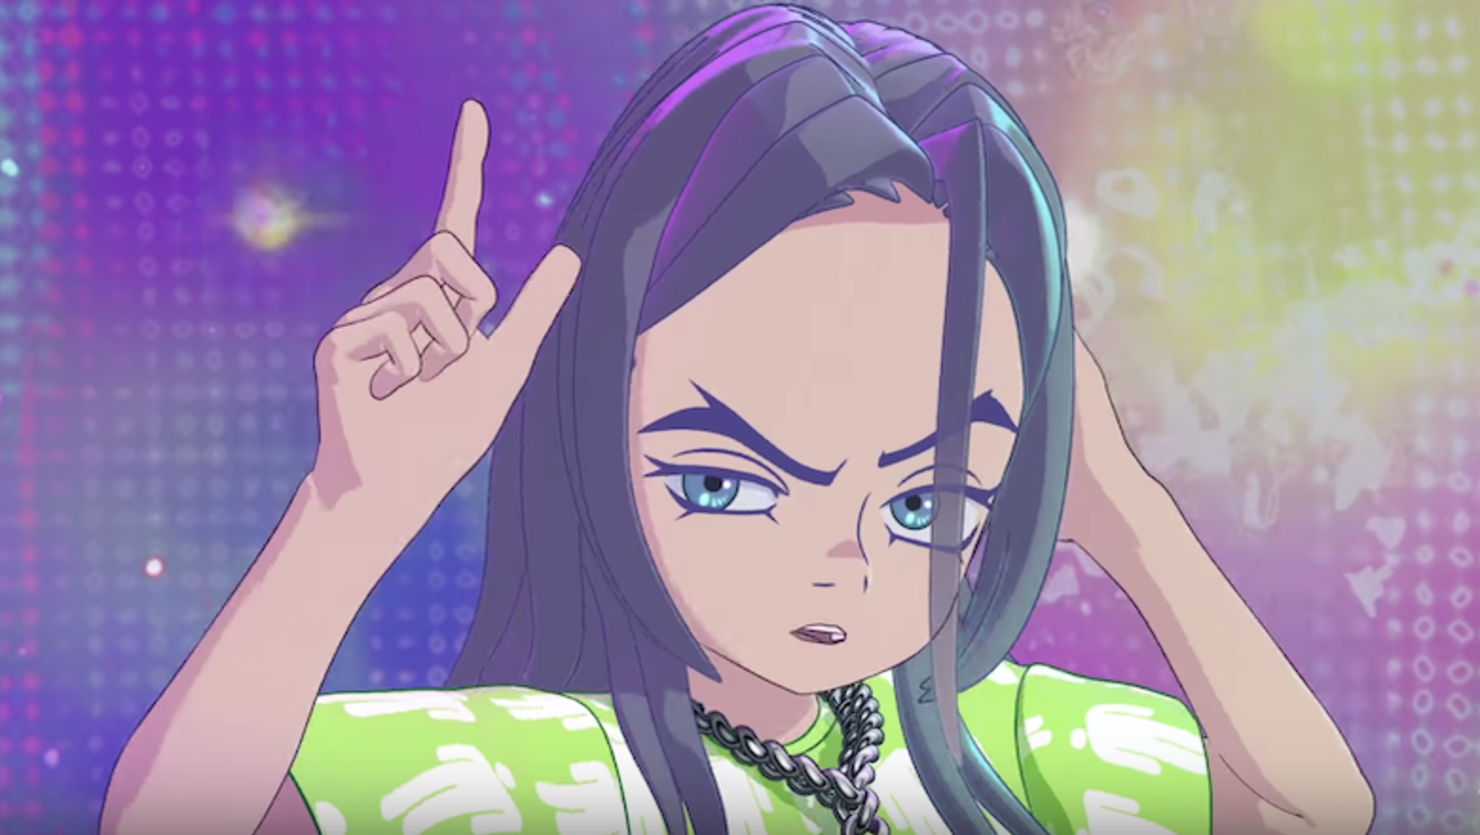 Billie Eilish Gets Animated In 'You Should See Me In A Crown' Video | iHeart